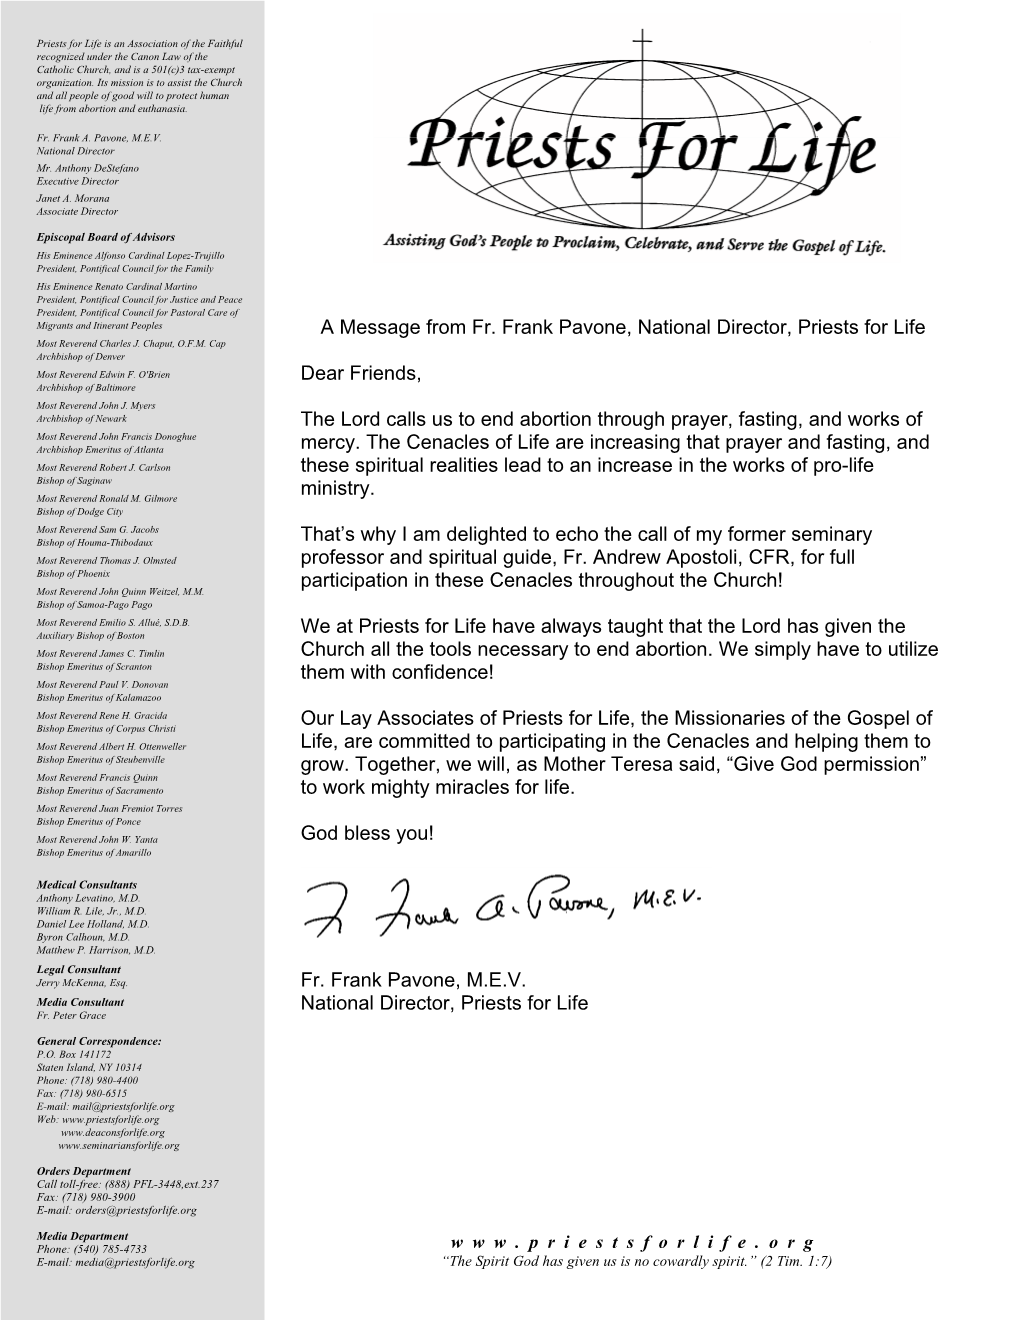 A Message from Fr. Frank Pavone, National Director, Priests for Life Most Reverend Charles J